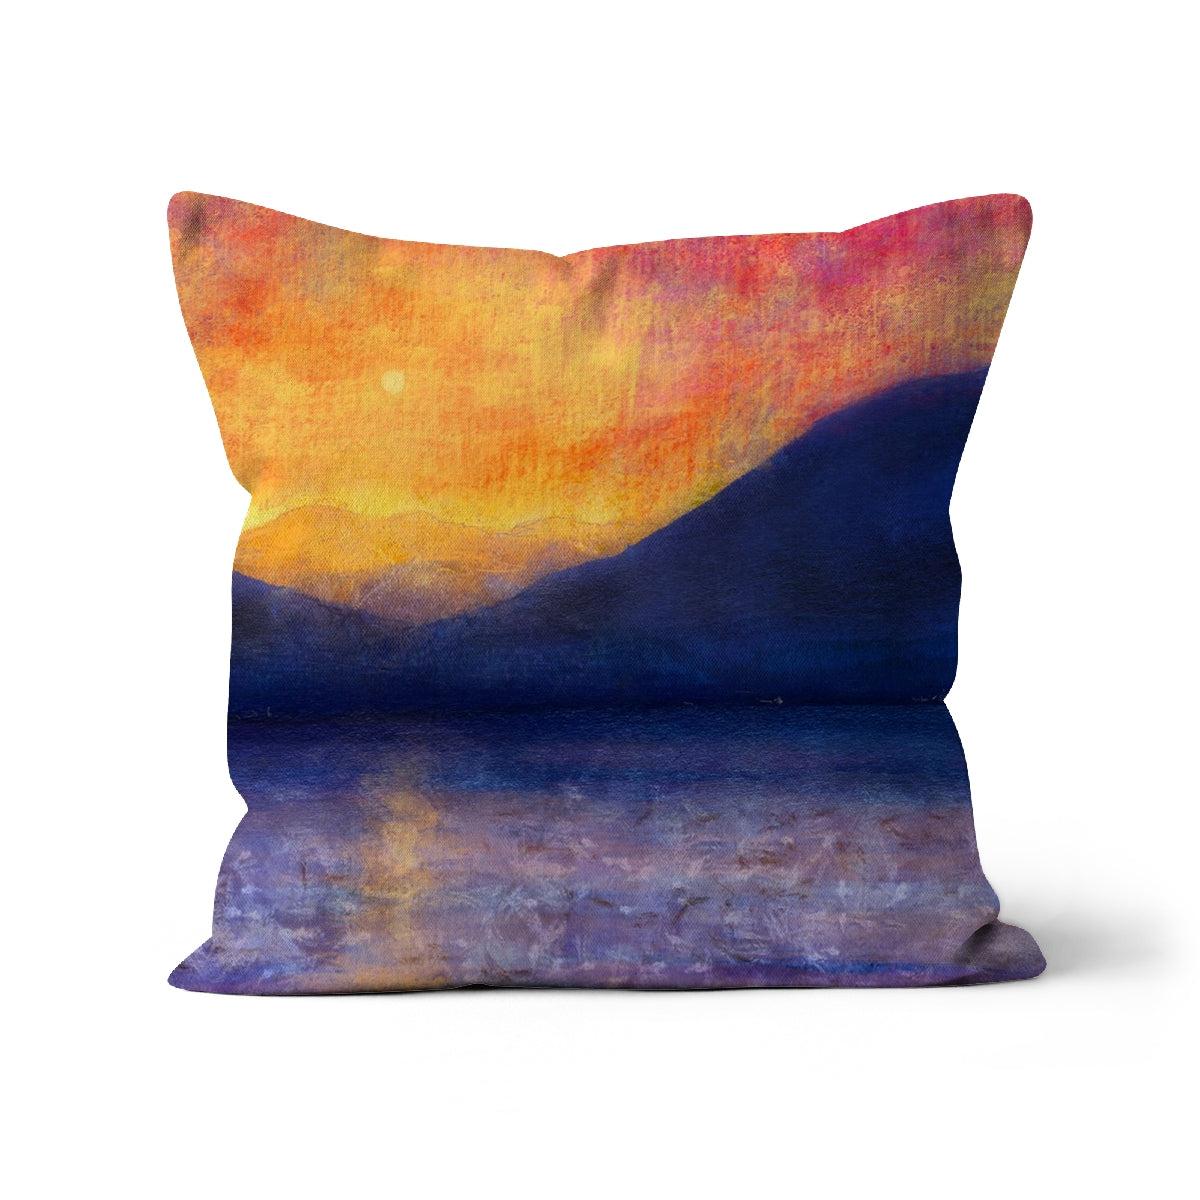 Sunset Approaching Mull Art Gifts Cushion-Cushions-Hebridean Islands Art Gallery-Faux Suede-18"x18"-Paintings, Prints, Homeware, Art Gifts From Scotland By Scottish Artist Kevin Hunter